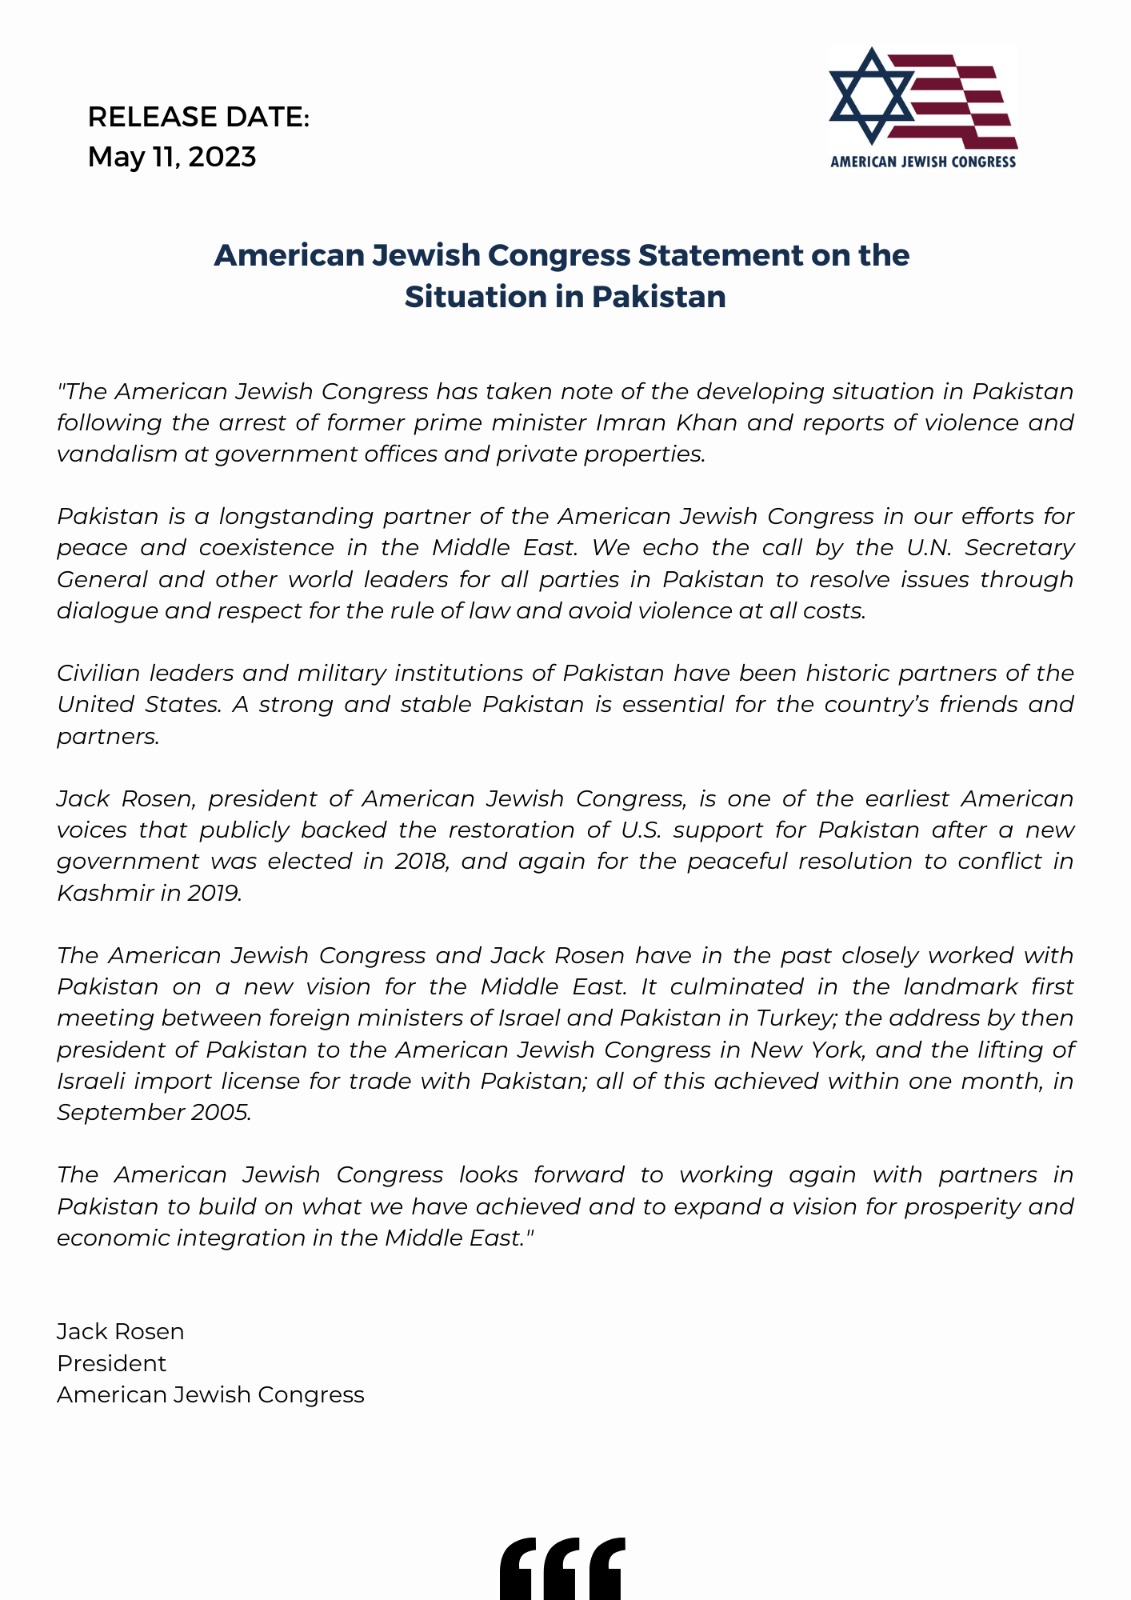 American Jewish Congress Statement On the Situation in Pakistan